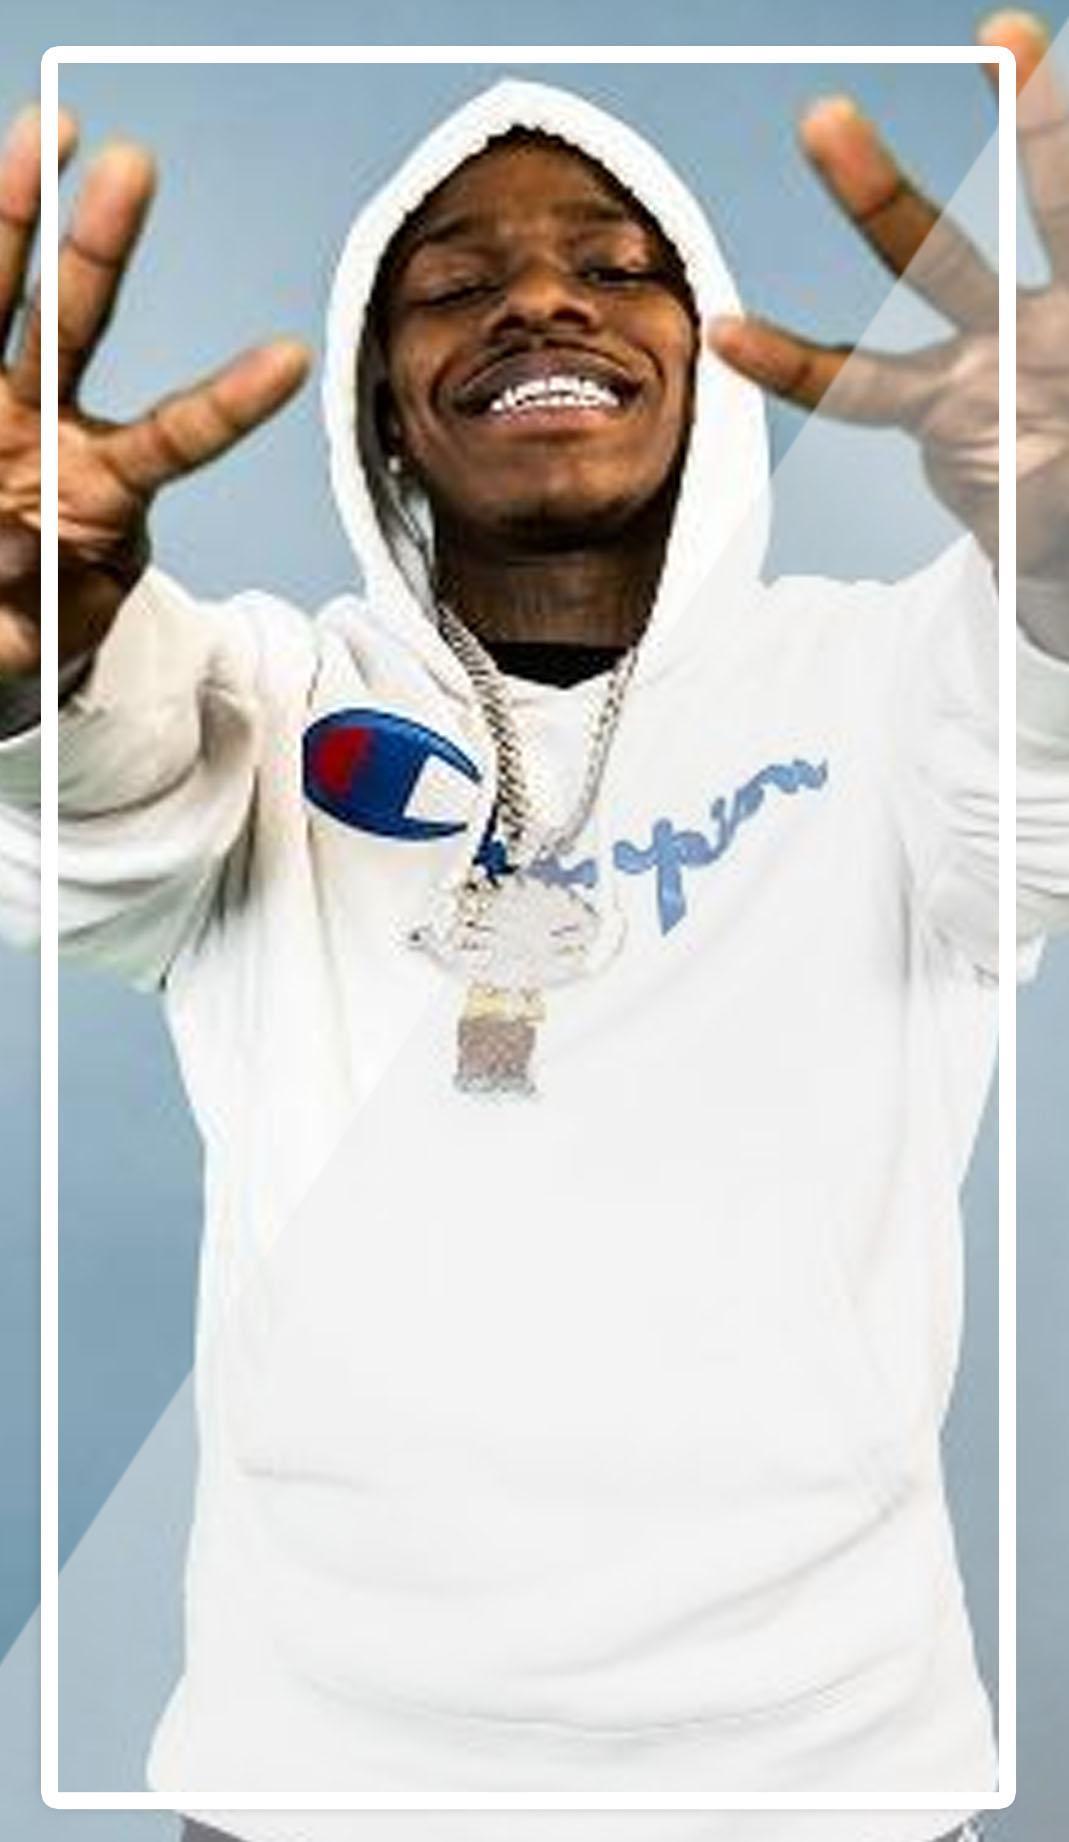 Dababy Wallpaper Iphone / Iphone Dababy Collage Wallpaper ...